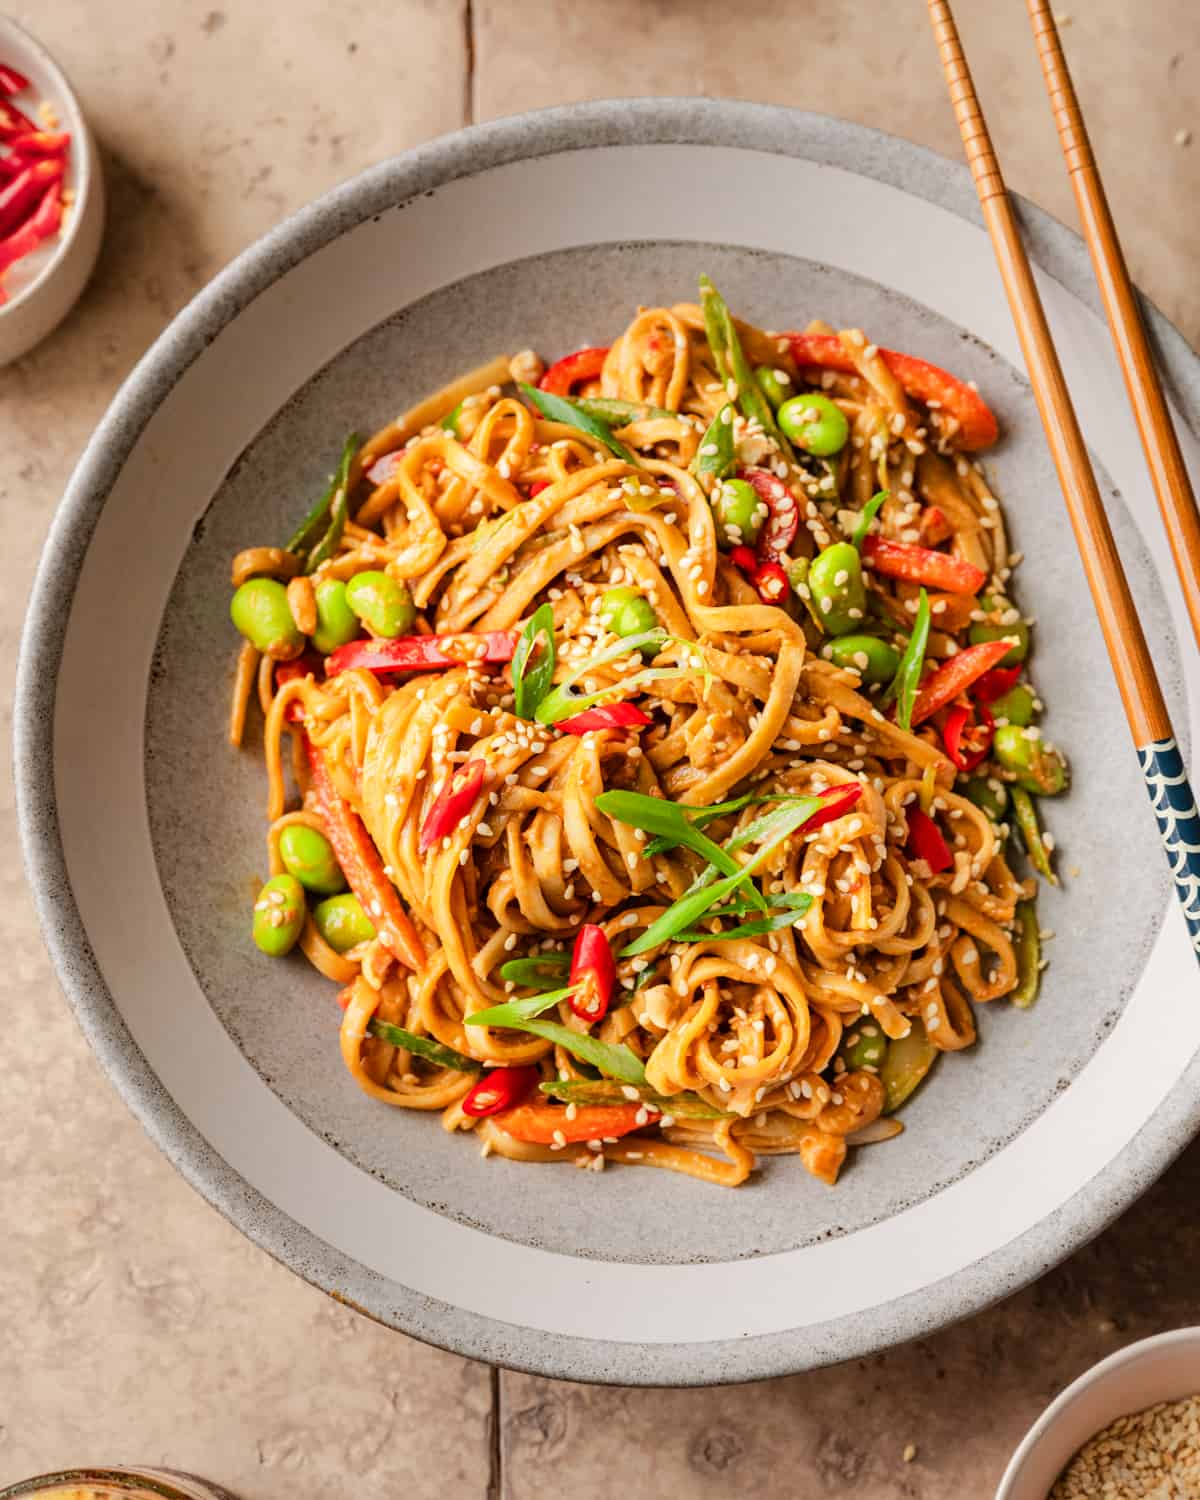 sesame noodles and chopsticks in a bowl on a table.